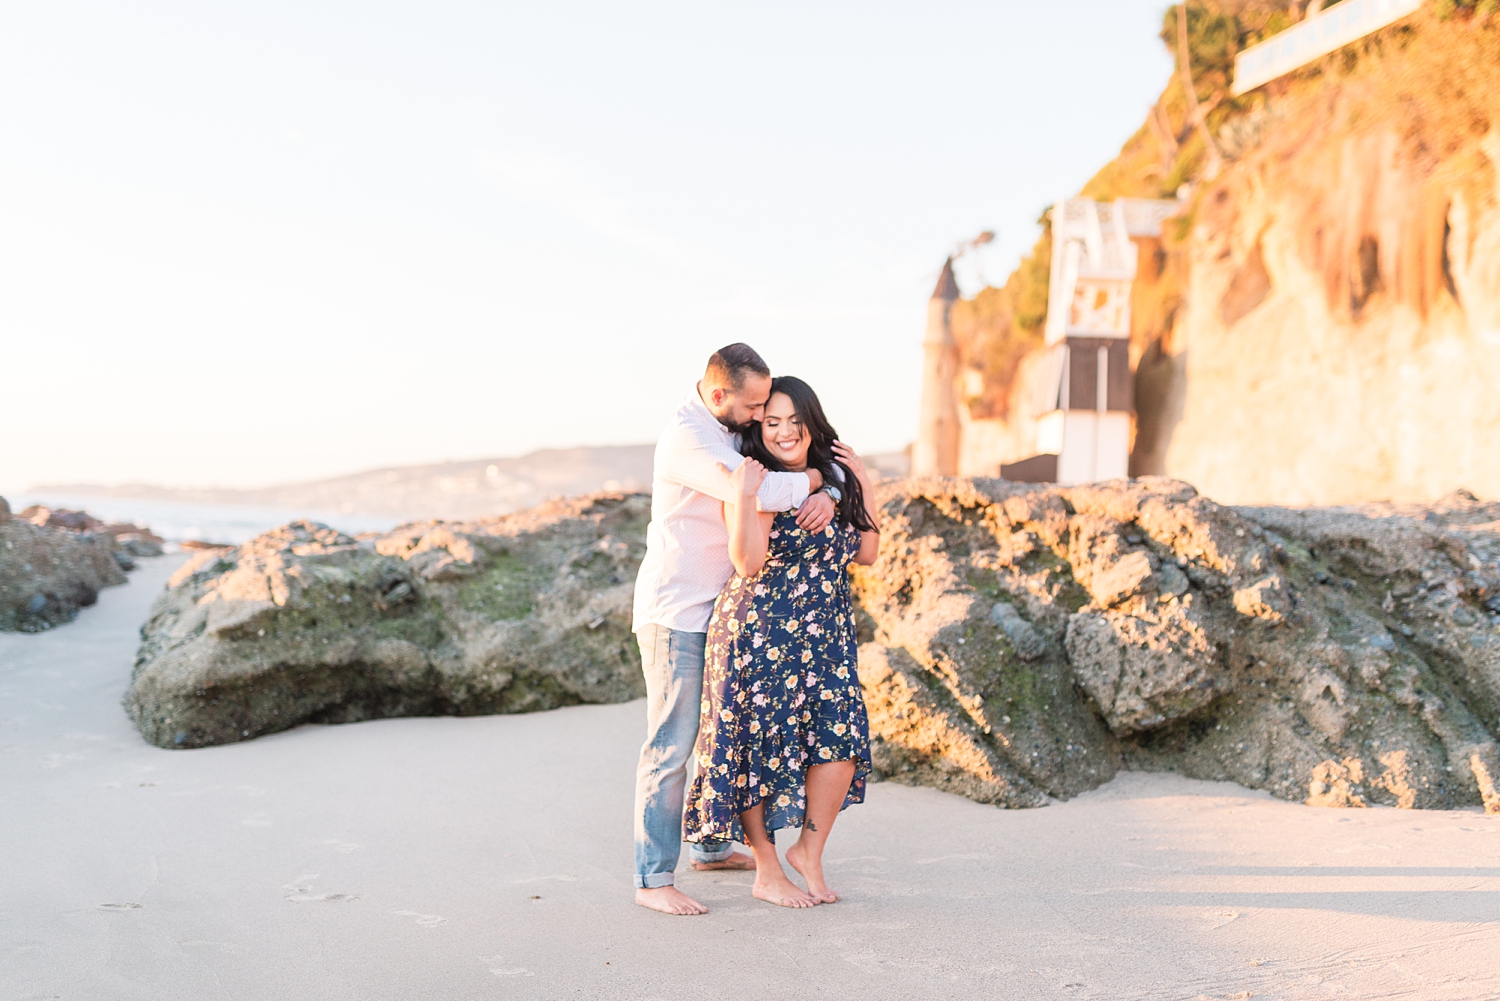 Beach Engagement Session 